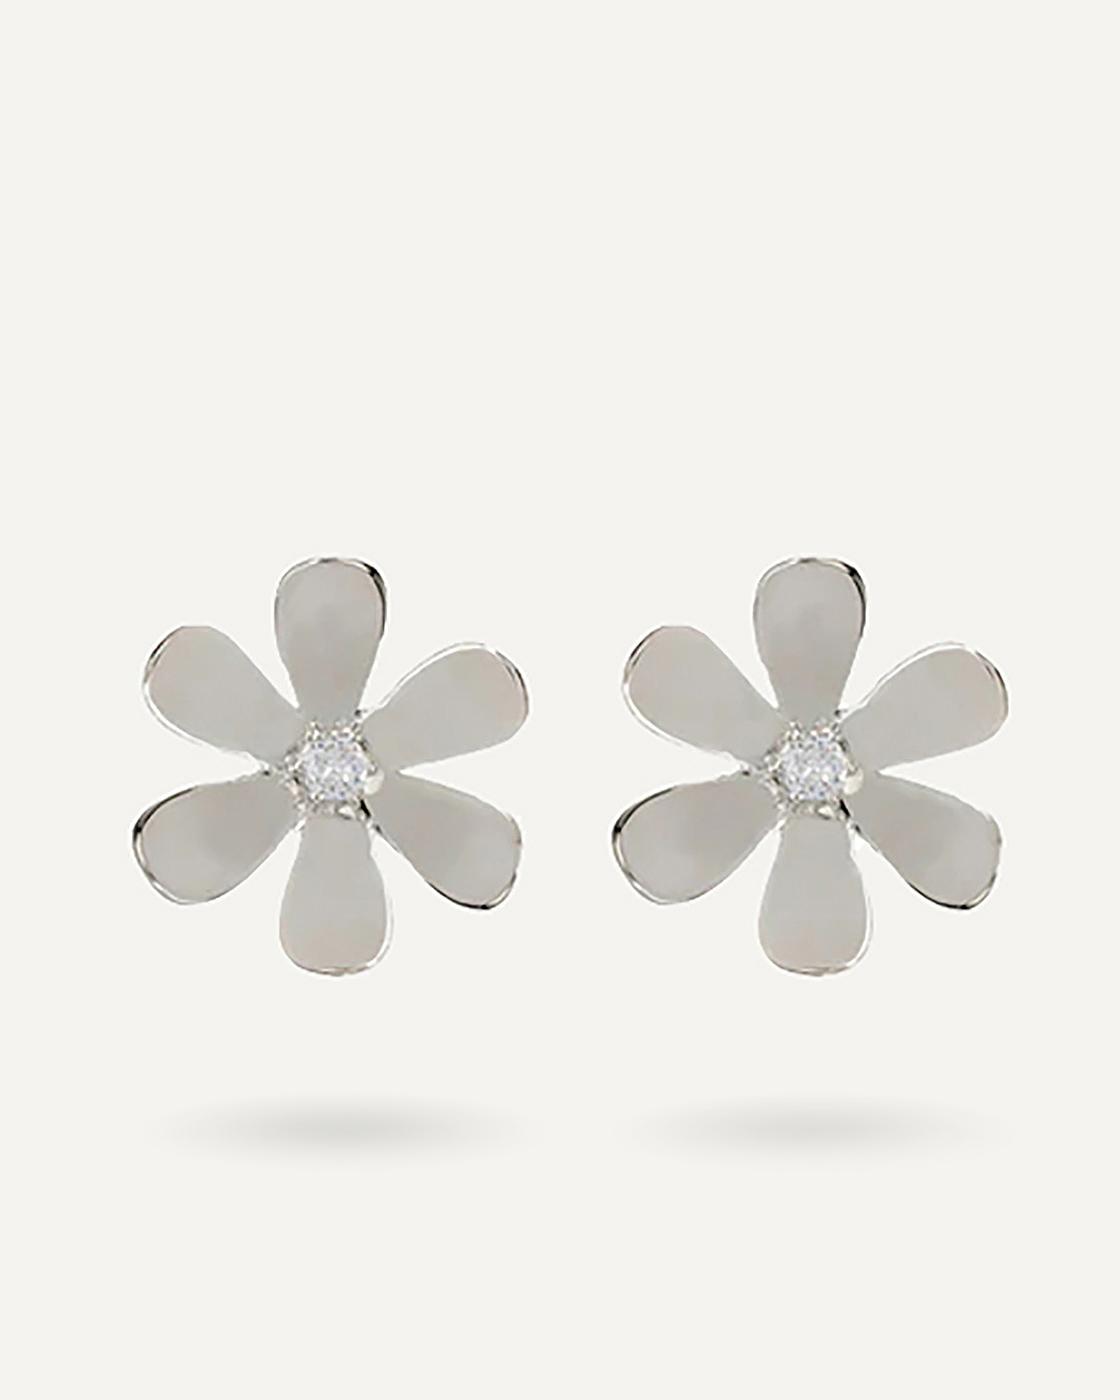 Daisy Silver-Plated Statement Earrings with Cubic Zirconia Crystals